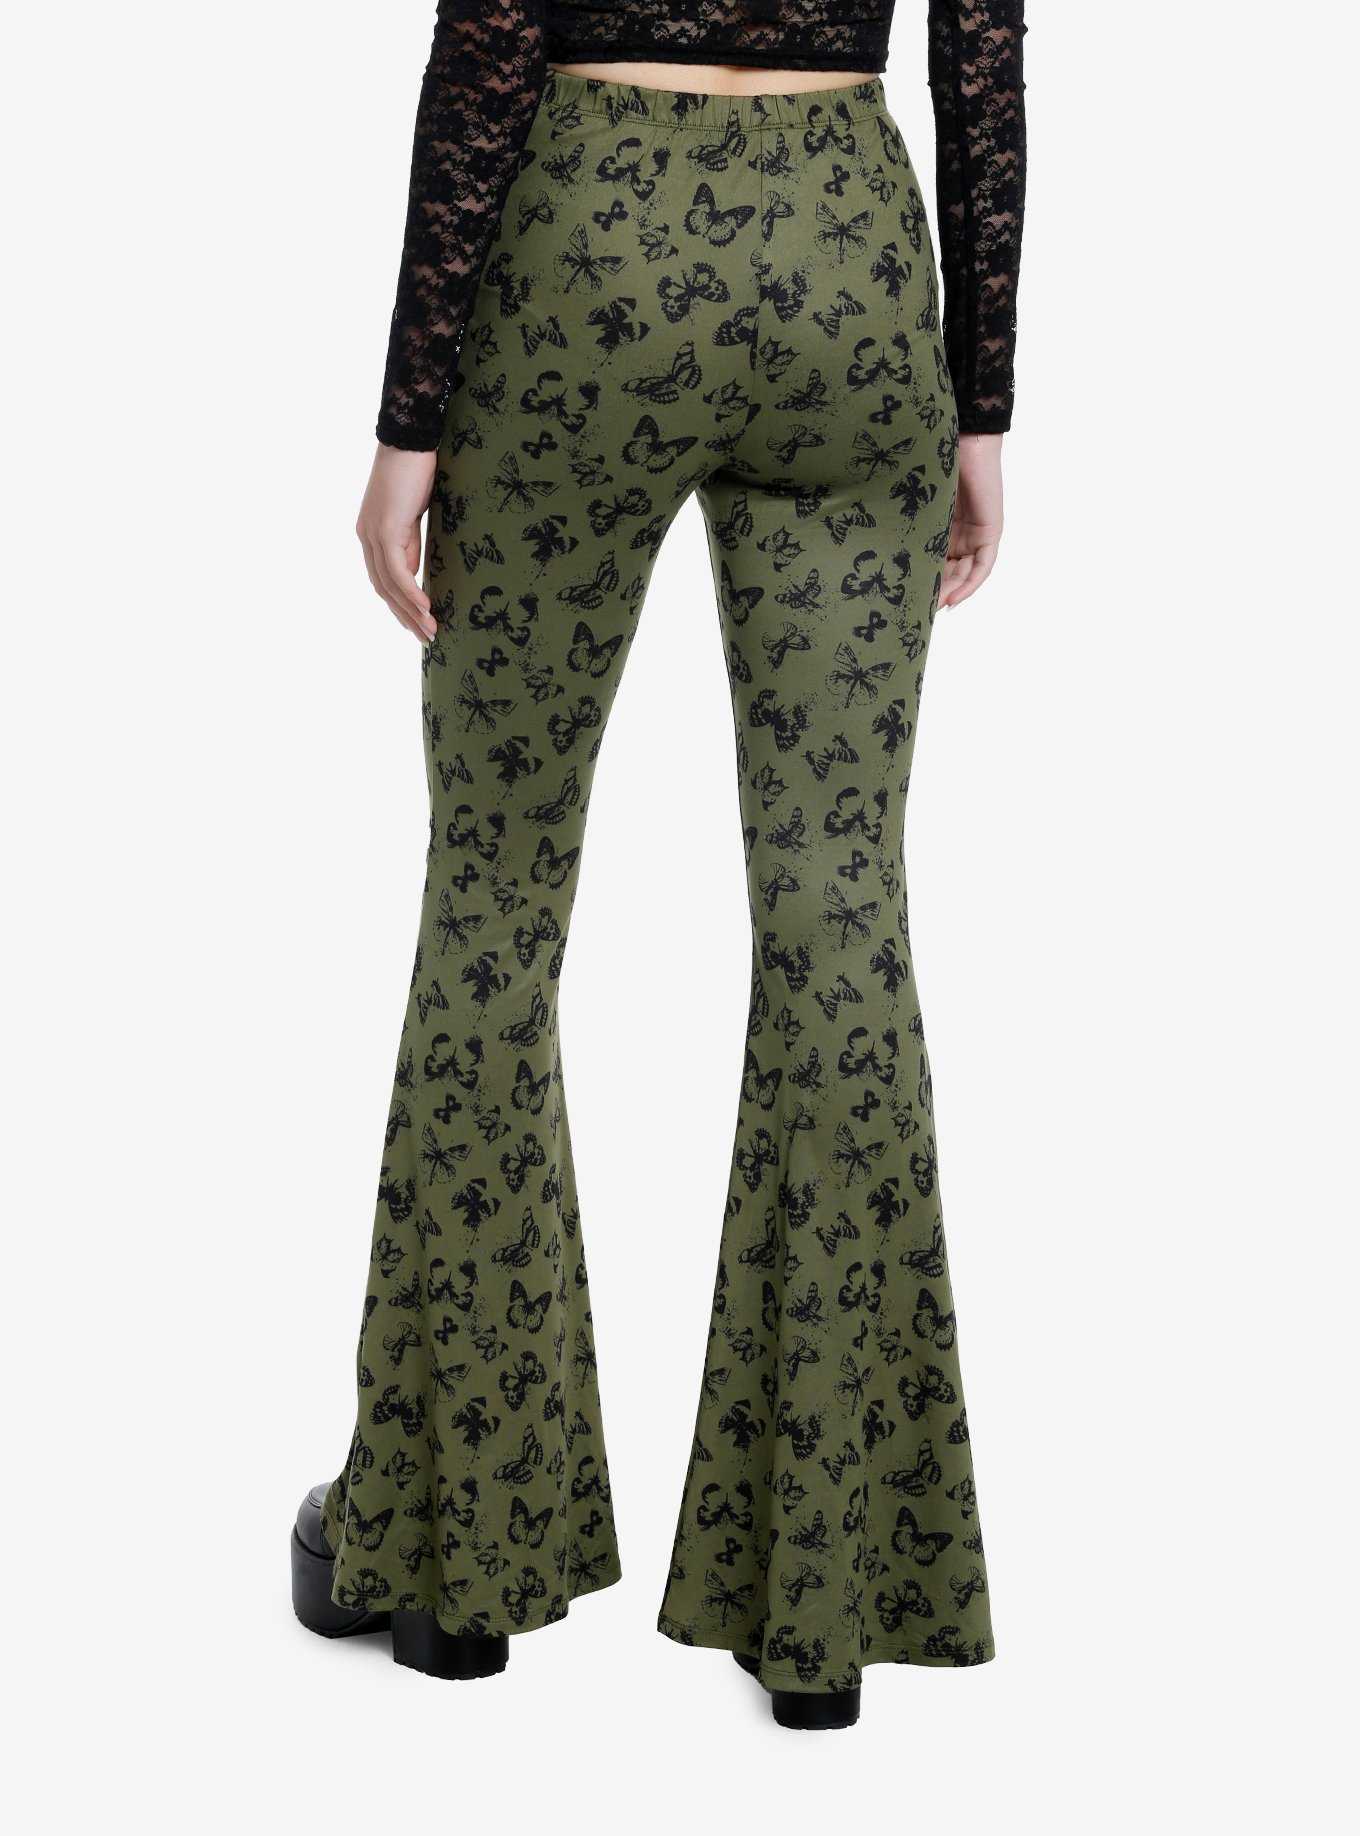 Thorn & Fable Green & Black Butterfly Flare Leggings, , hi-res